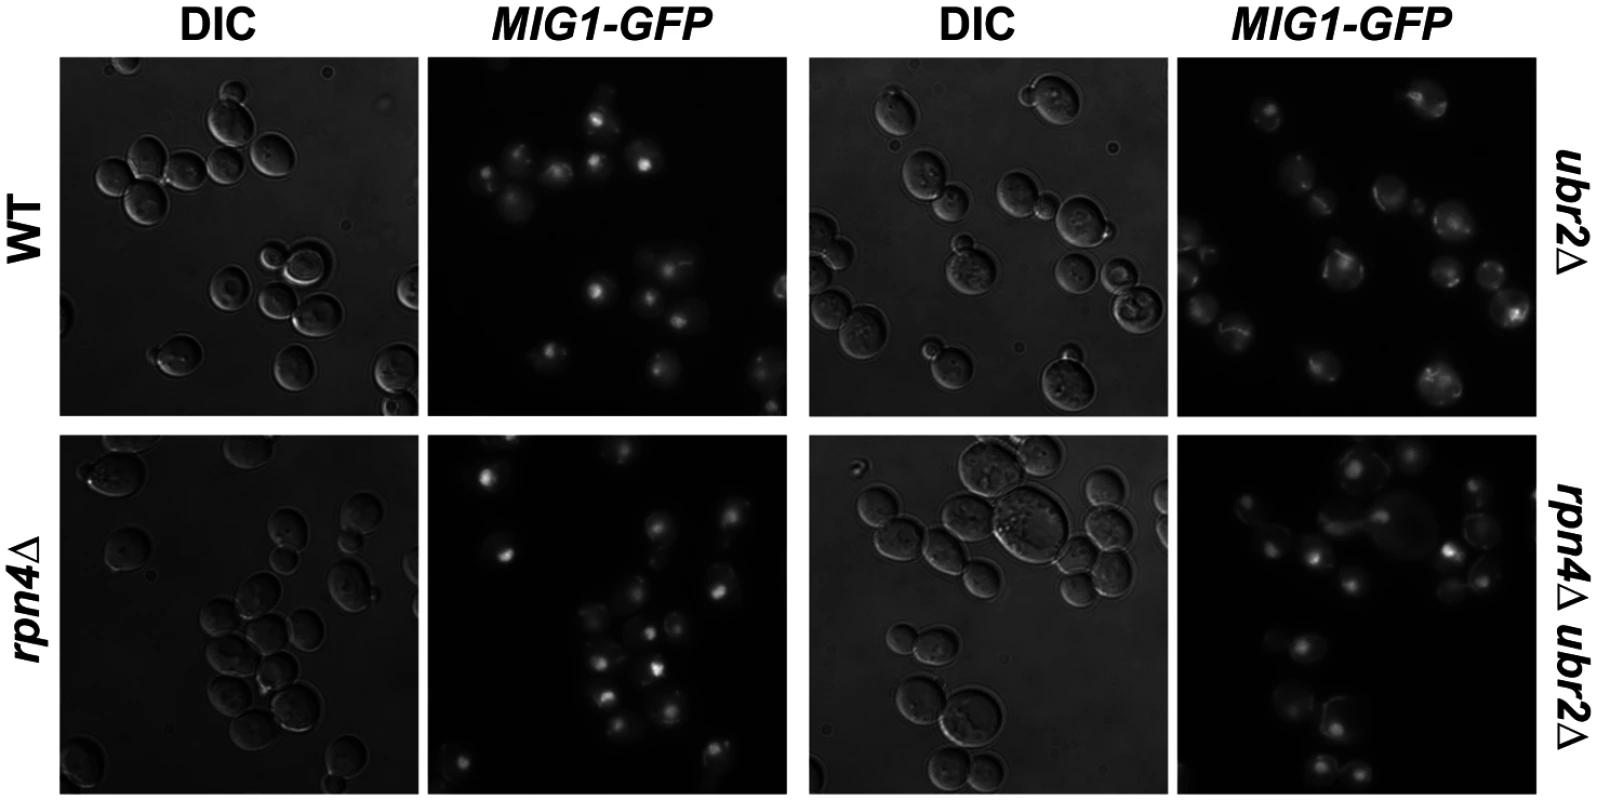 Mig1 is mislocalized in in cells with increased proteasome capacity.